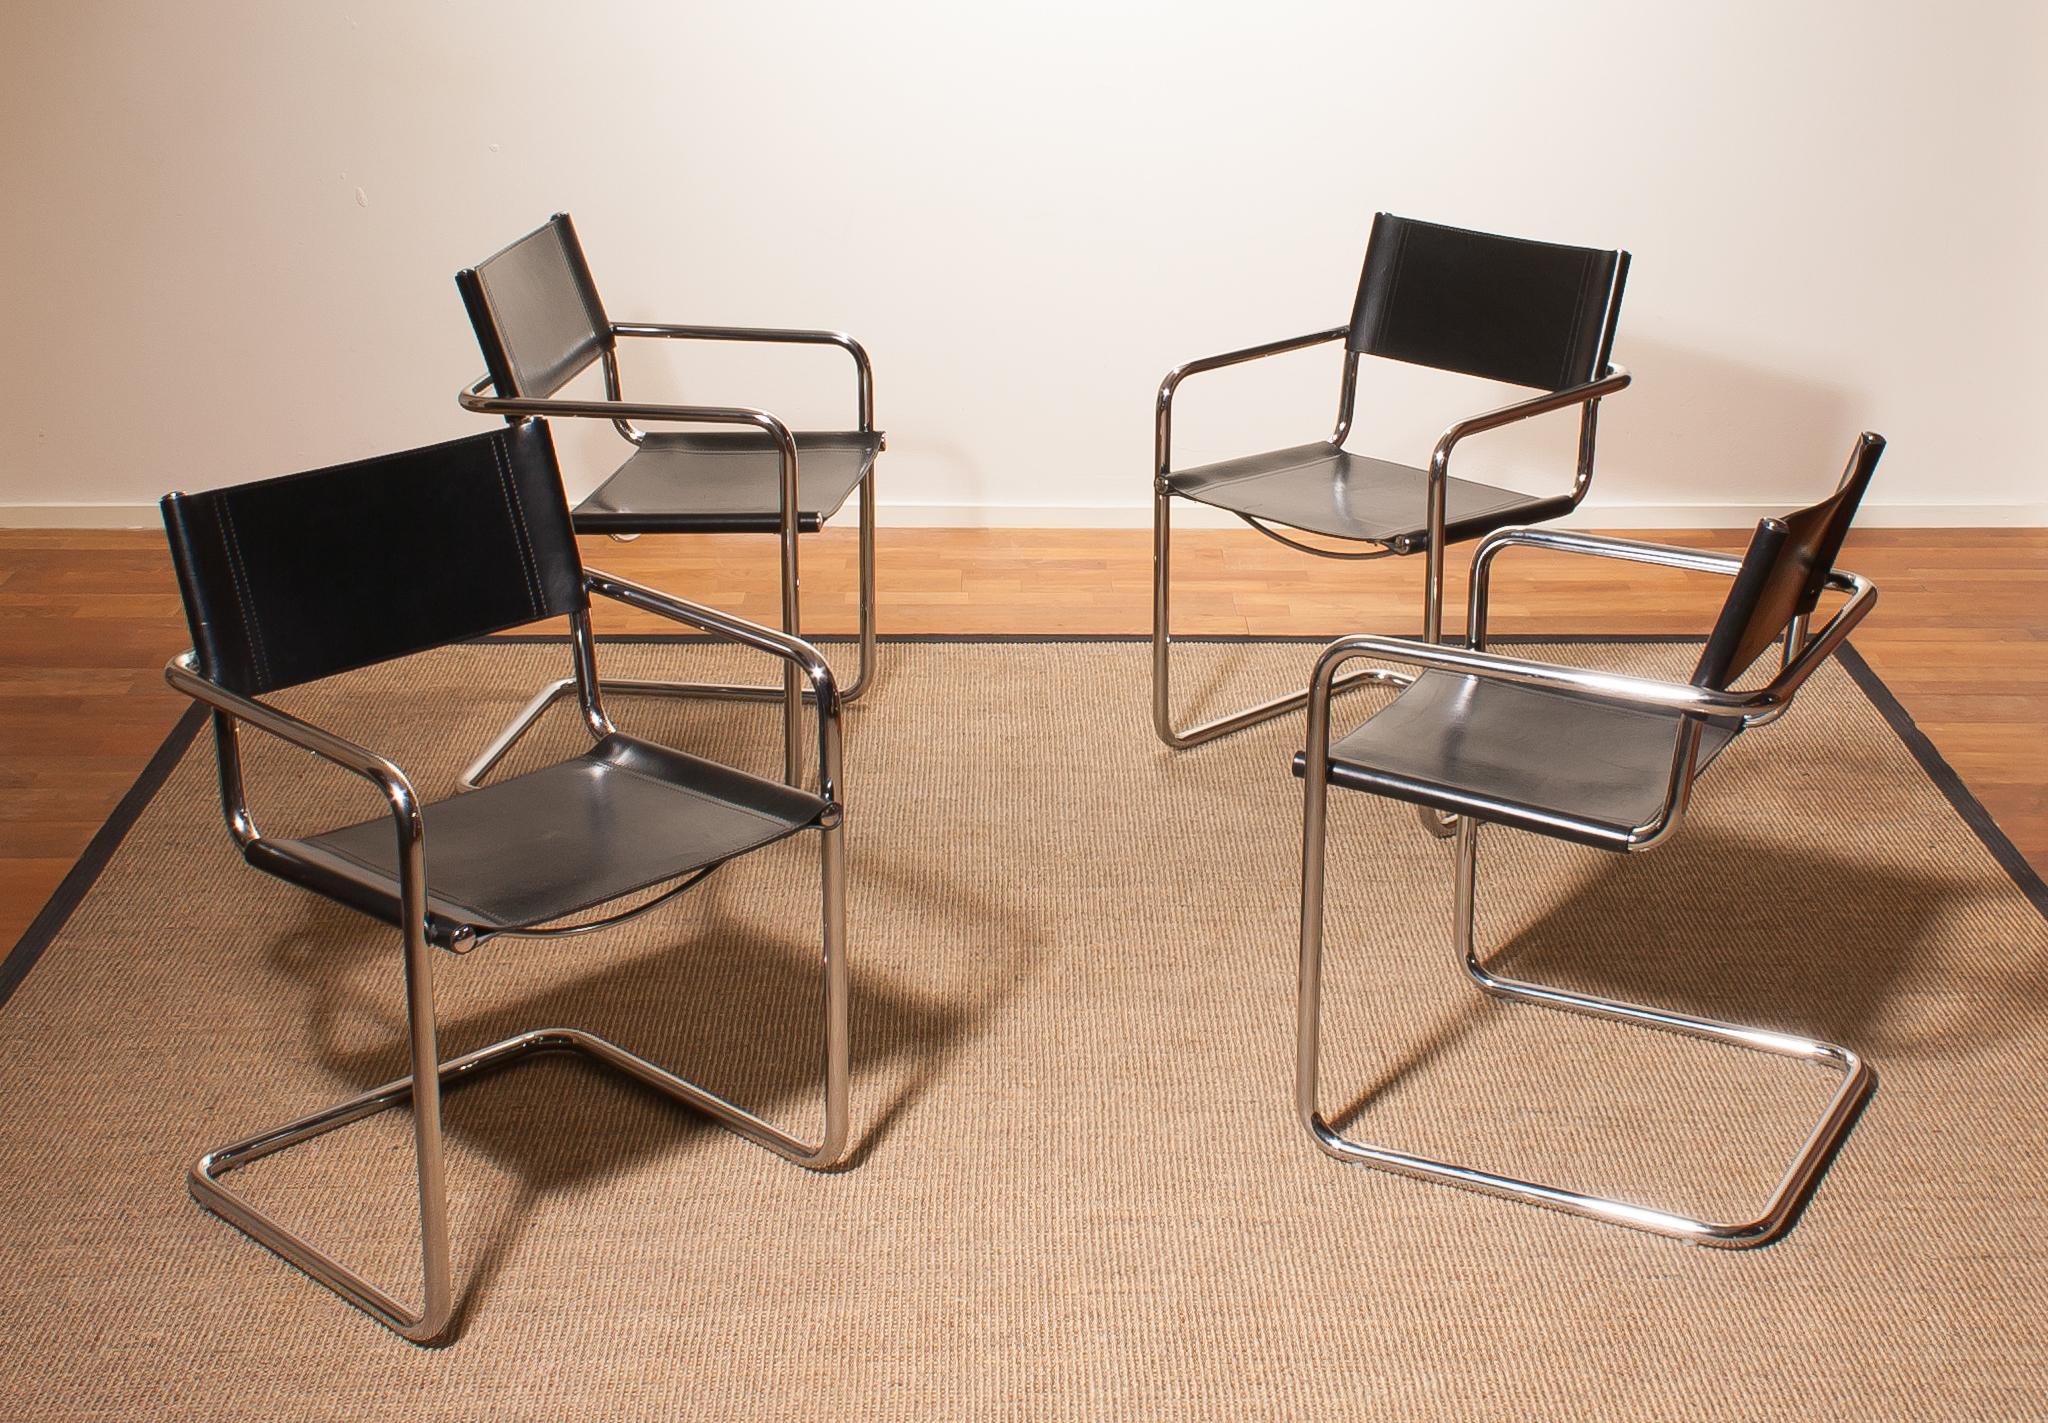 A beautiful set of four dining chairs made by Matteo Grassi, Italy.
The chairs have tubular chrome steel frames with sturdy black leather seating and backrest.
They are signed on the back of the backrest.
The chairs are in very nice